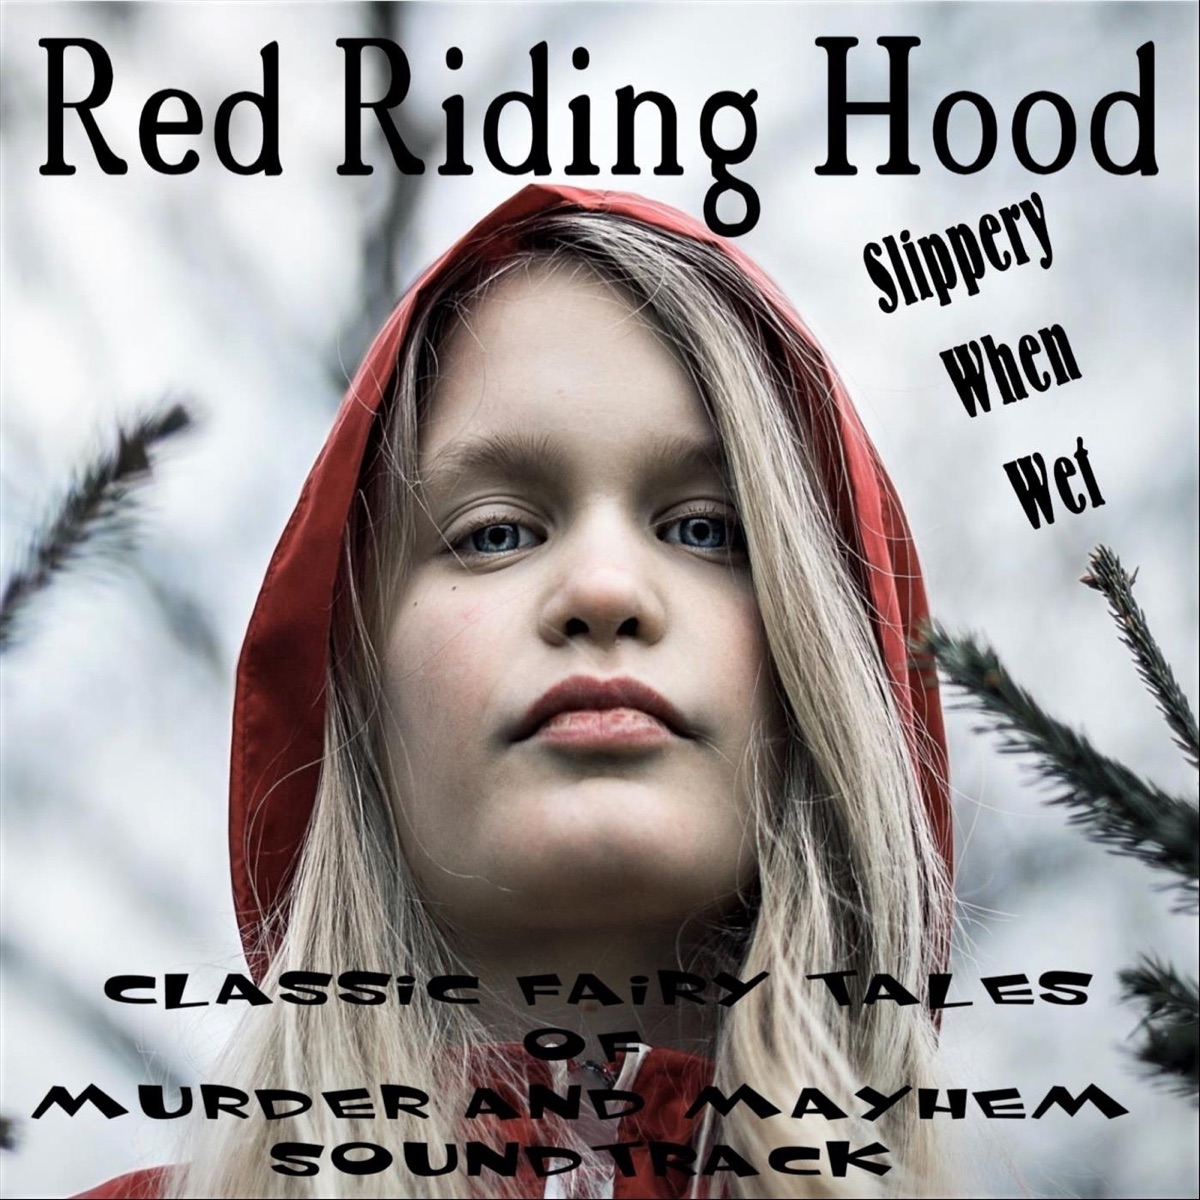 Red Riding Hood Classic Fairy Tales of Murder and Mayhem (Original  Soundtrack) - Single - Album by Slippery When Wet - Apple Music